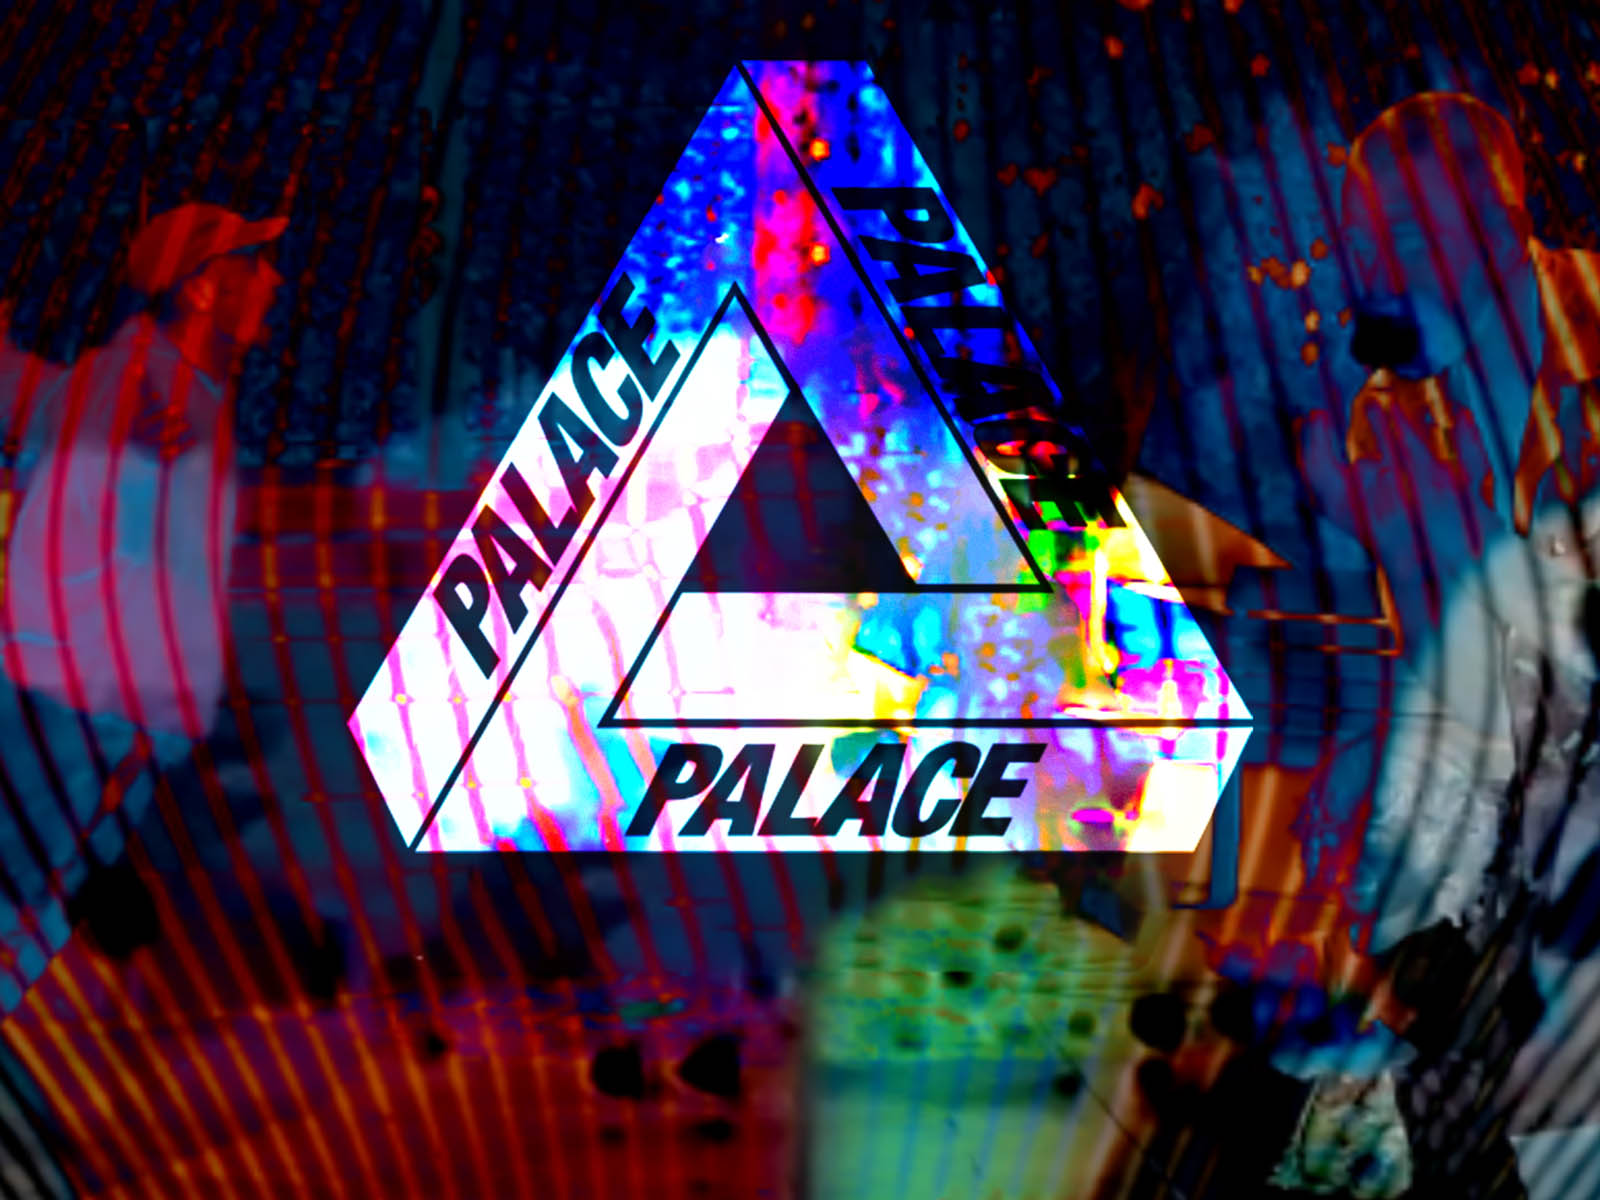 Palace launches exclusive DJ mixes on Apple Music